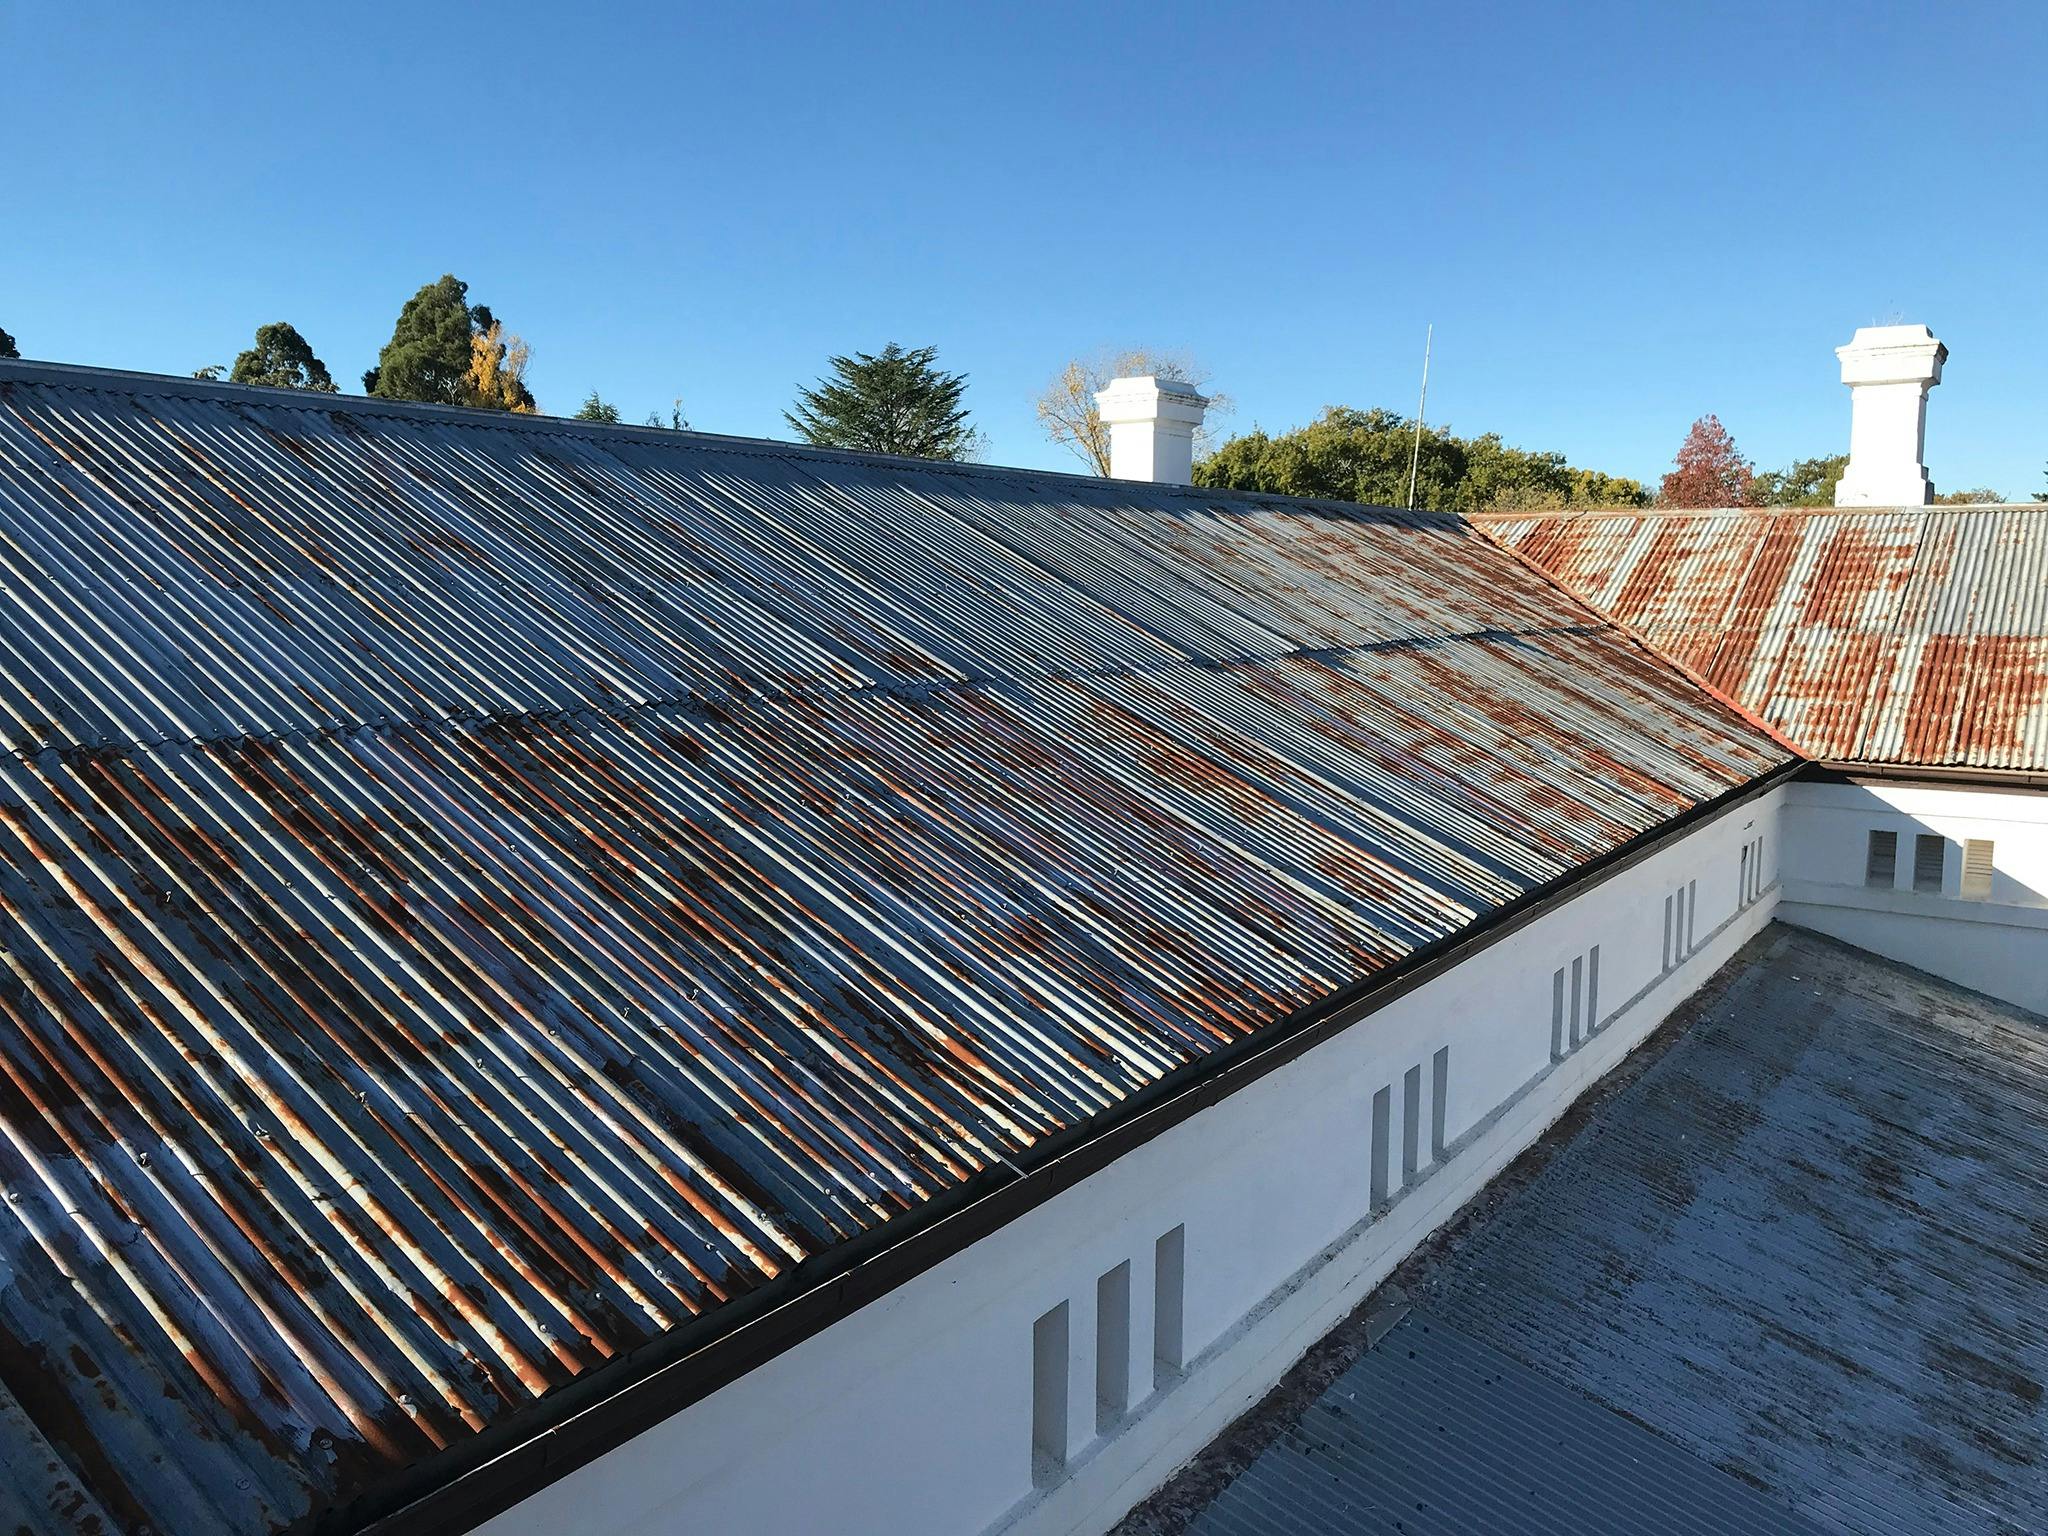 Colour photo of the store galvanized steel roof-line showing some surface rust